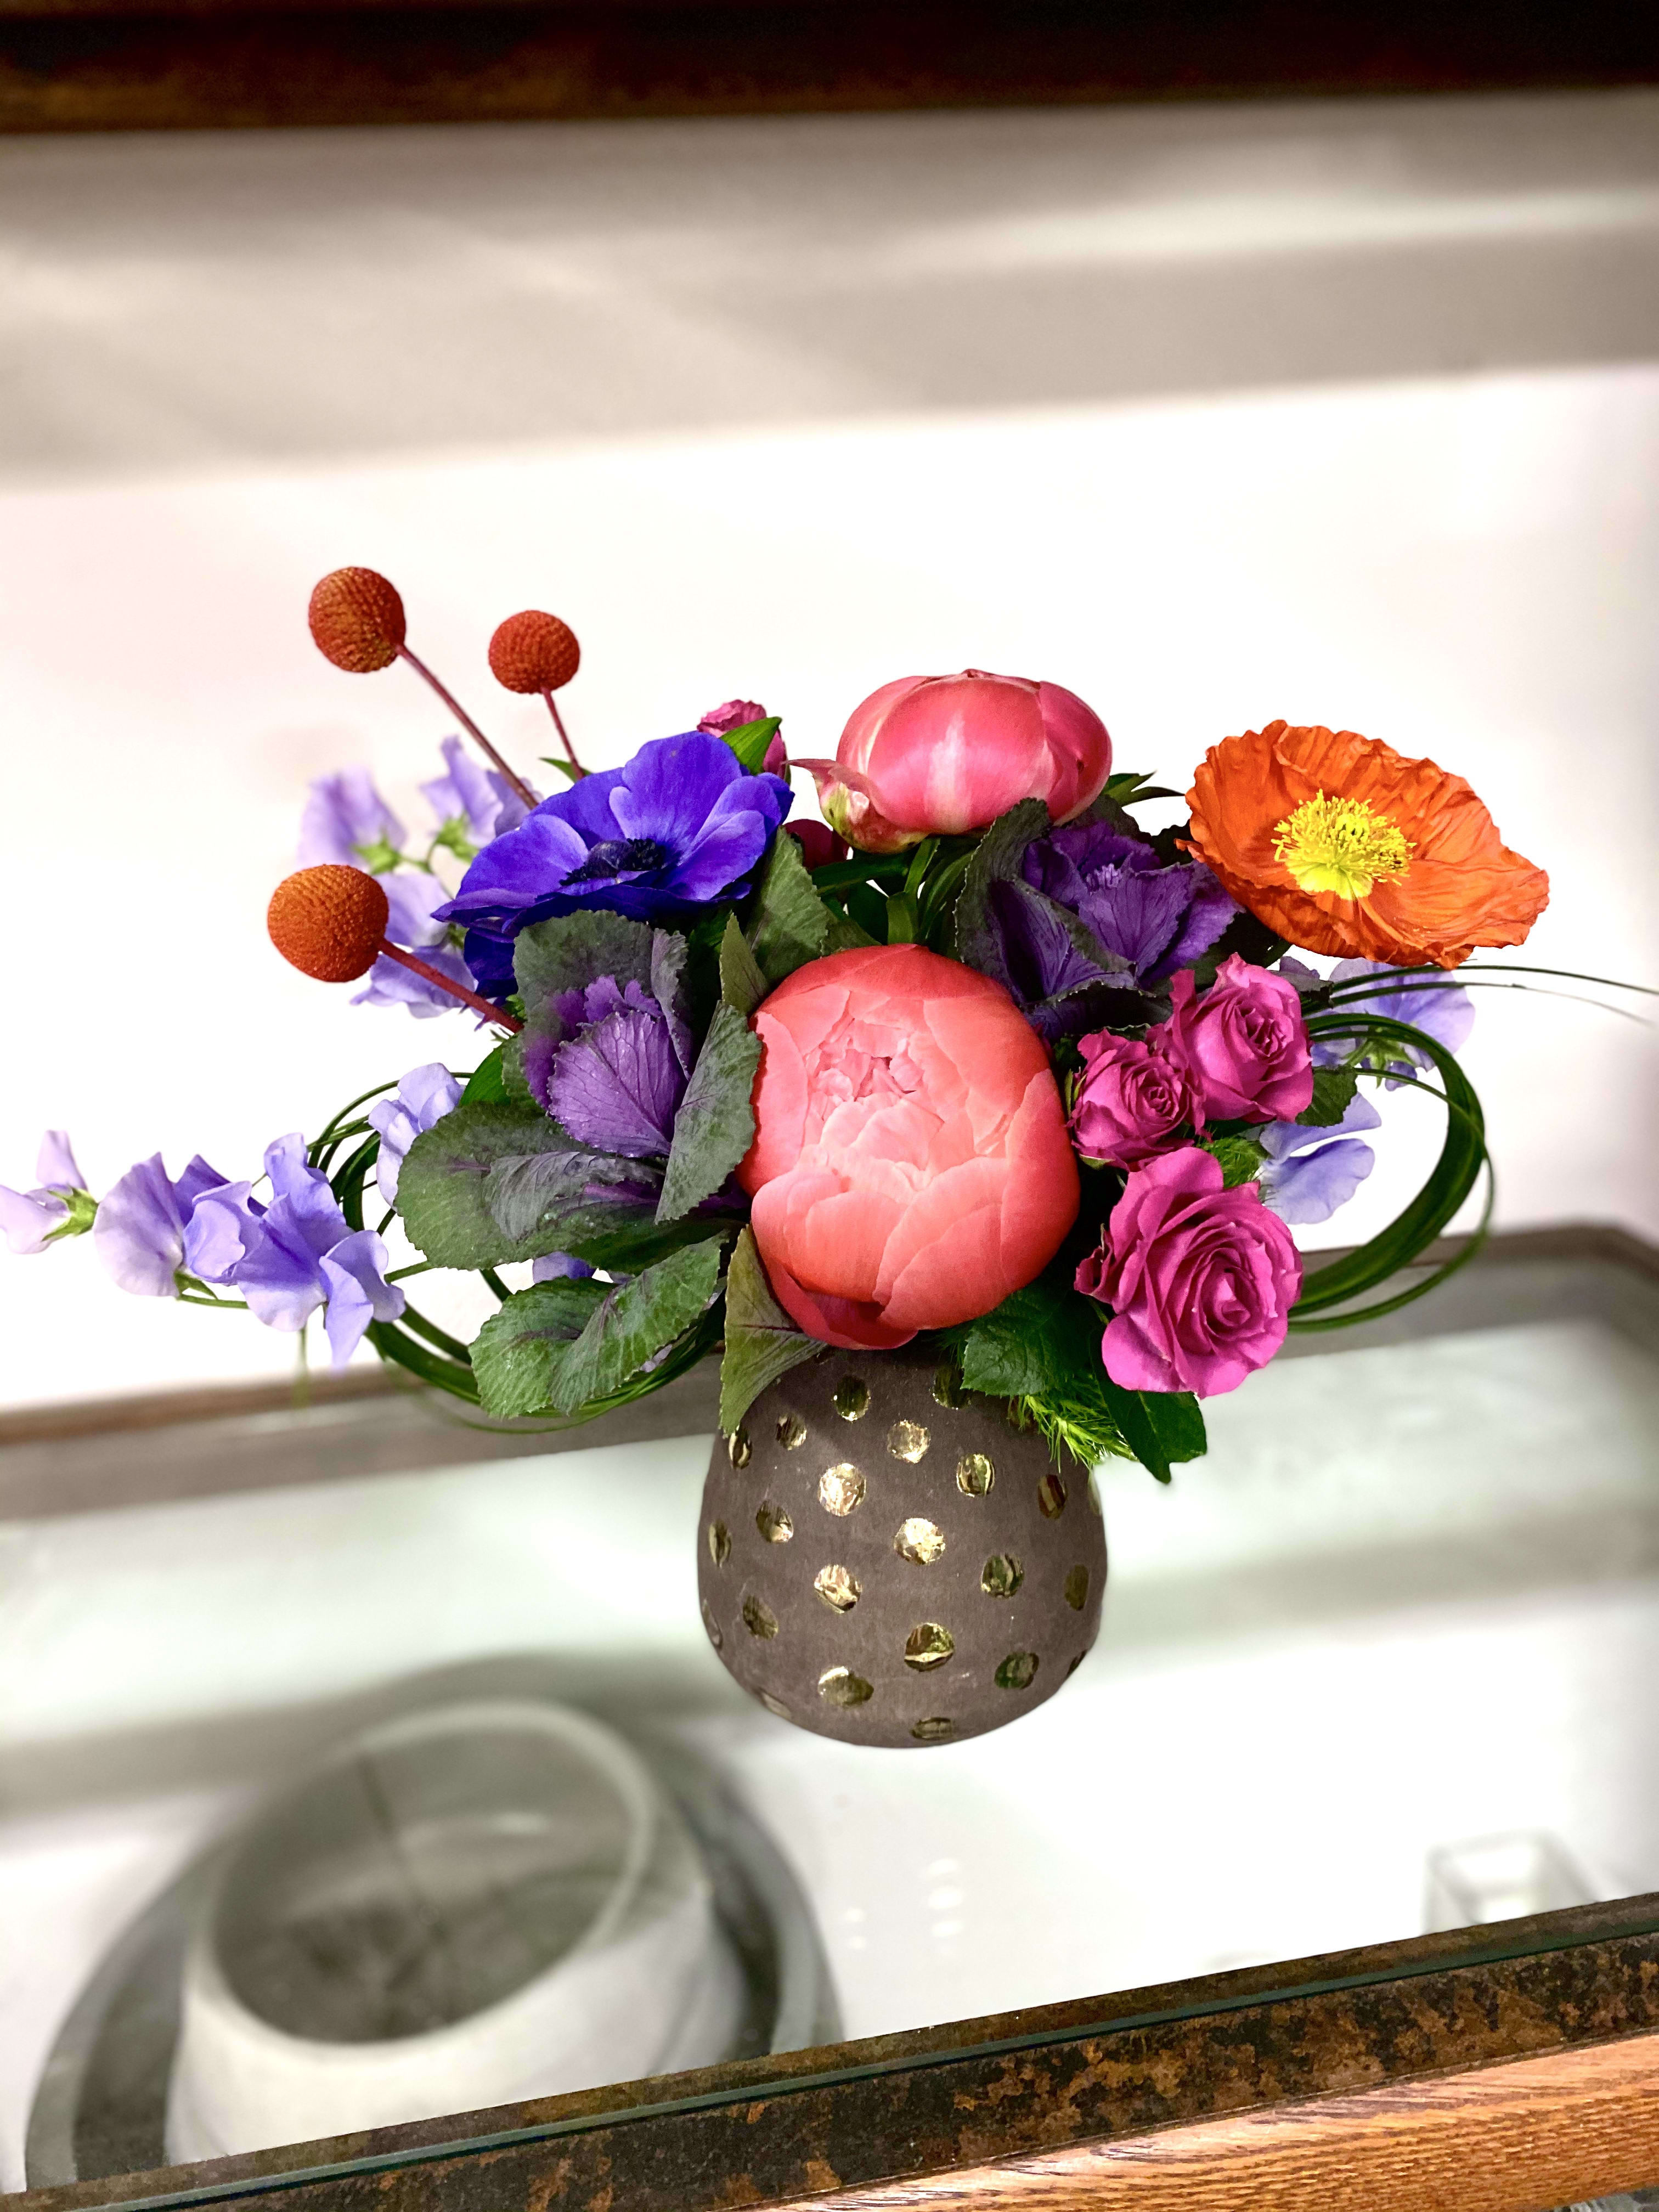 Charolette  - This flirtatious and colorful arrangement is made with the ever-so-loveable coral peonies, purple kale, lavender sweet peas, blue anemones, and finished off with dyed billy balls. Sure to be a hit with the fun-loving and playful person in your life. 